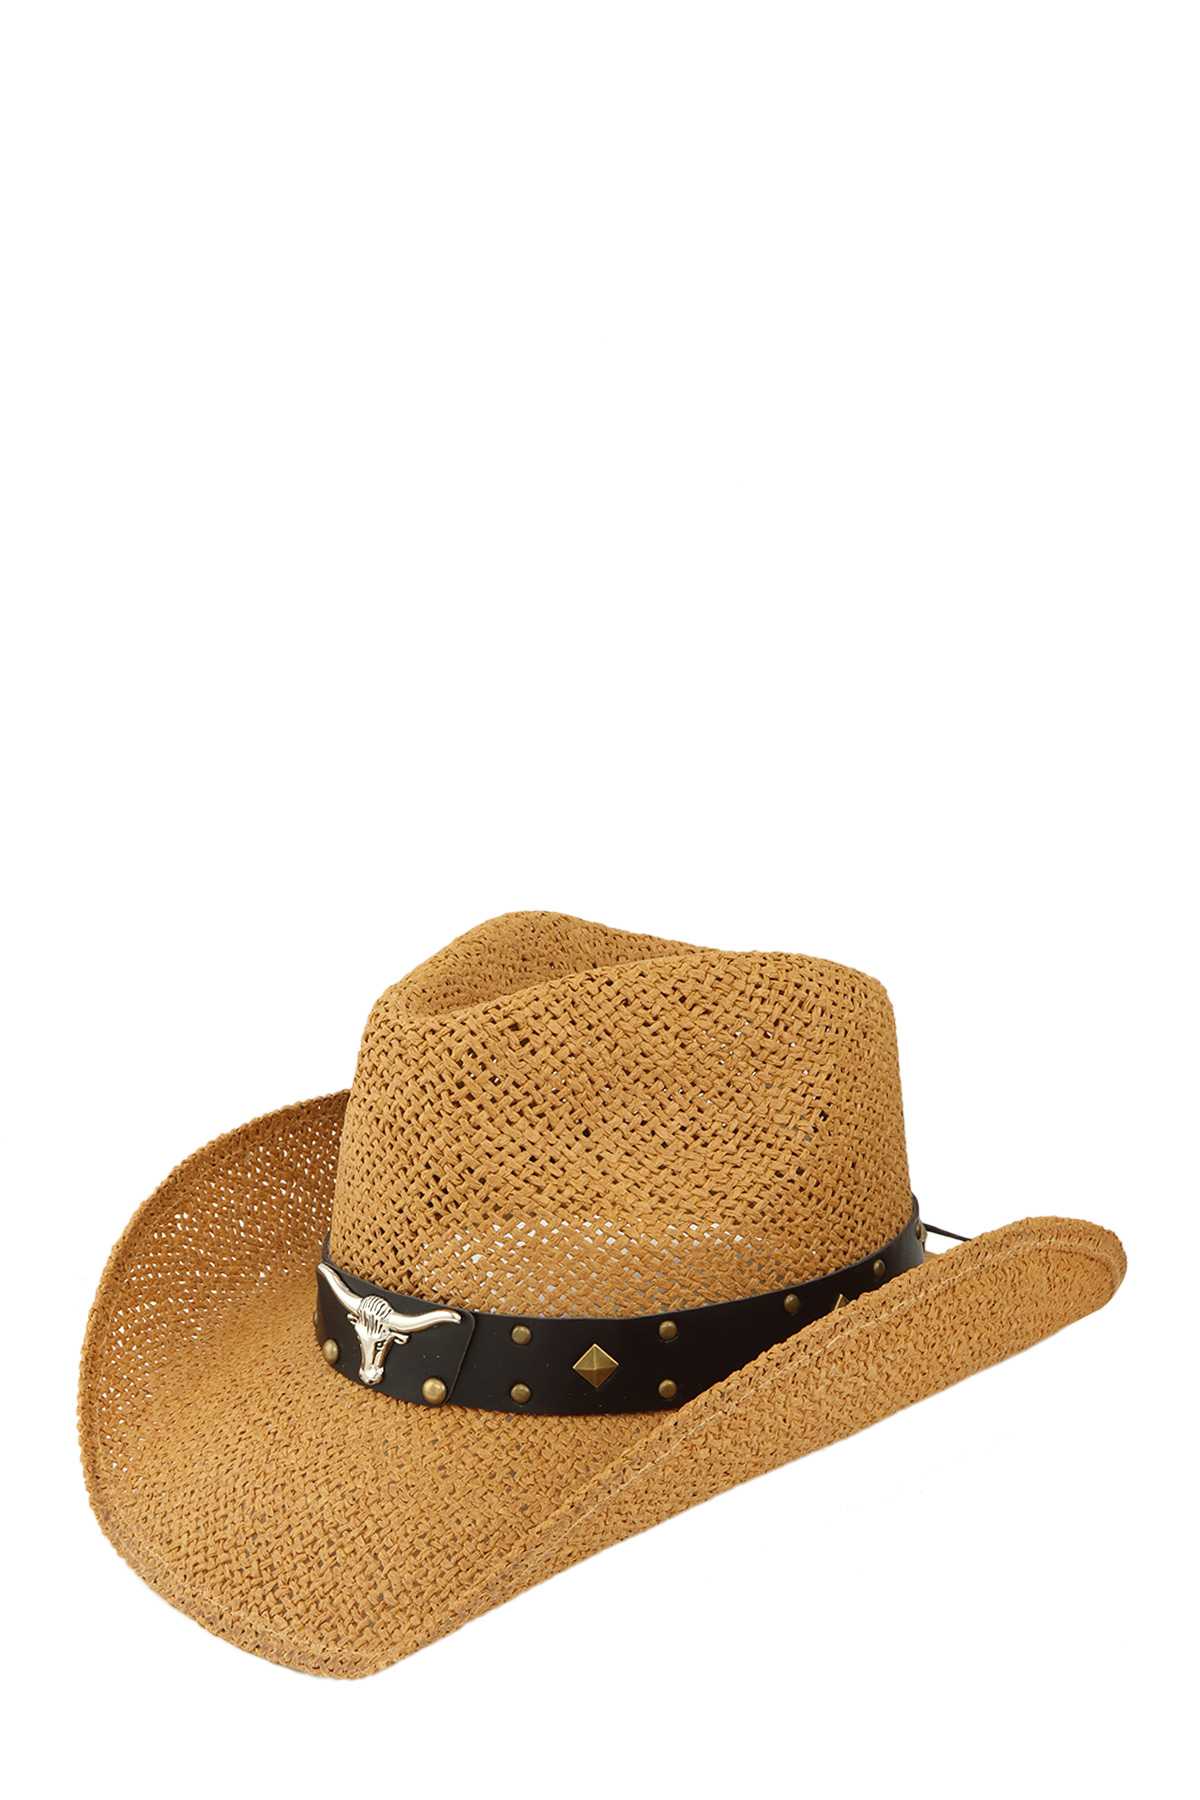 Cow Buckle and Cowboy Style Beaded Straw Hat